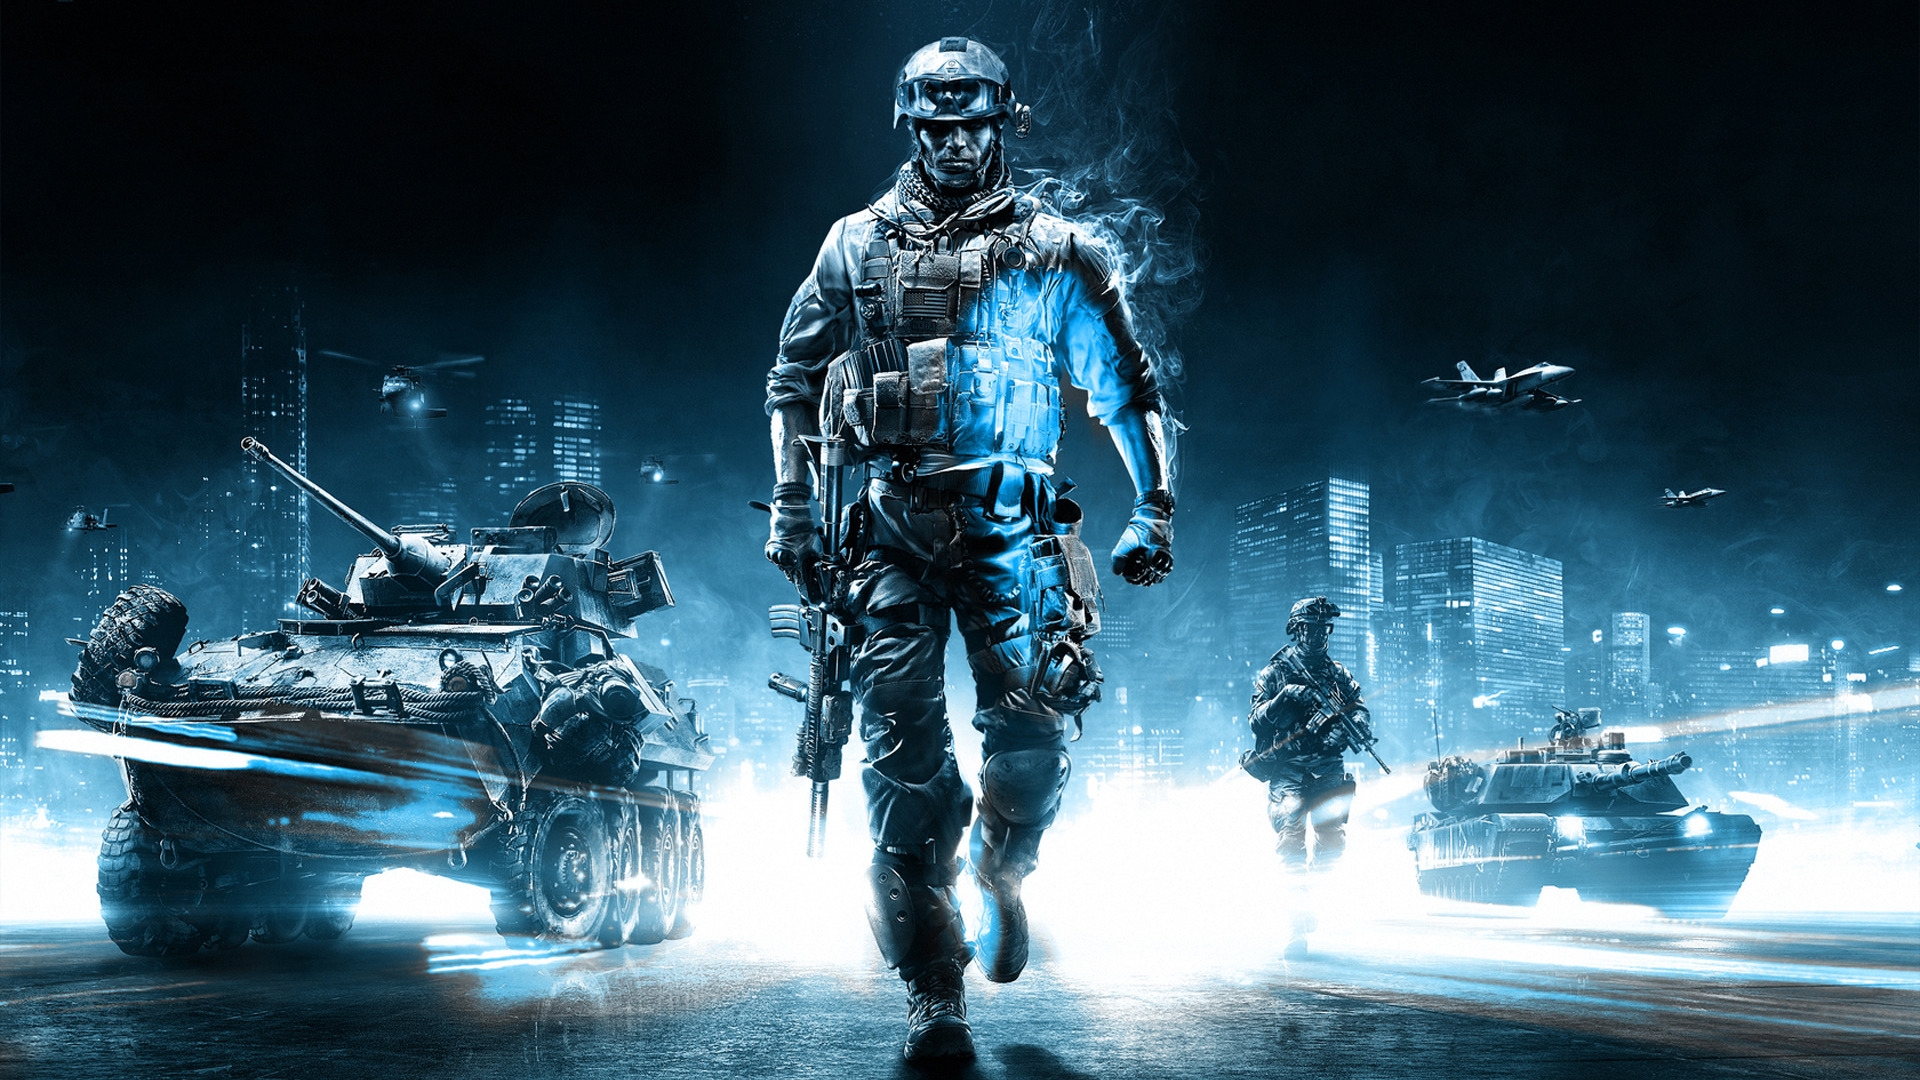 Battlefield 3 Action Game for 1920 x 1080 HDTV 1080p resolution